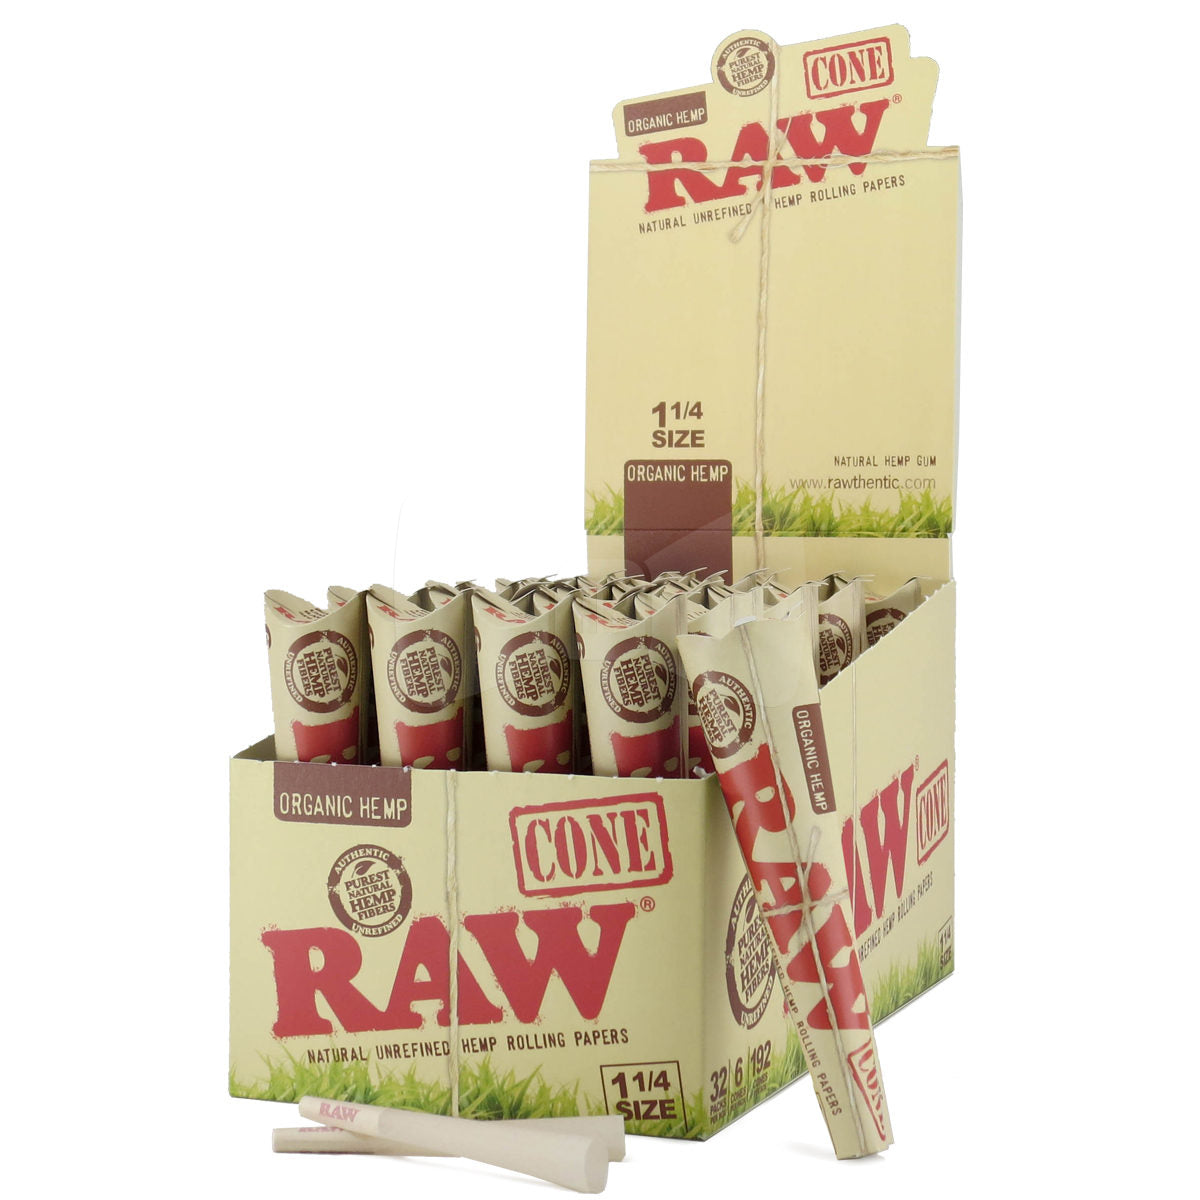 Raw Organic 1 1/4 Pre-Rolled Cones (6-Pack) yoga smokes yoga studio, delivery, delivery near me, yoga smokes smoke shop, find smoke shop, head shop near me, yoga studio, headshop, head shop, local smoke shop, psl, psl smoke shop, smoke shop, smokeshop, yoga, yoga studio, dispensary, local dispensary, smokeshop near me, port saint lucie, florida, port st lucie, lounge, life, highlife, love, stoned, highsociety. Yoga Smokes Case